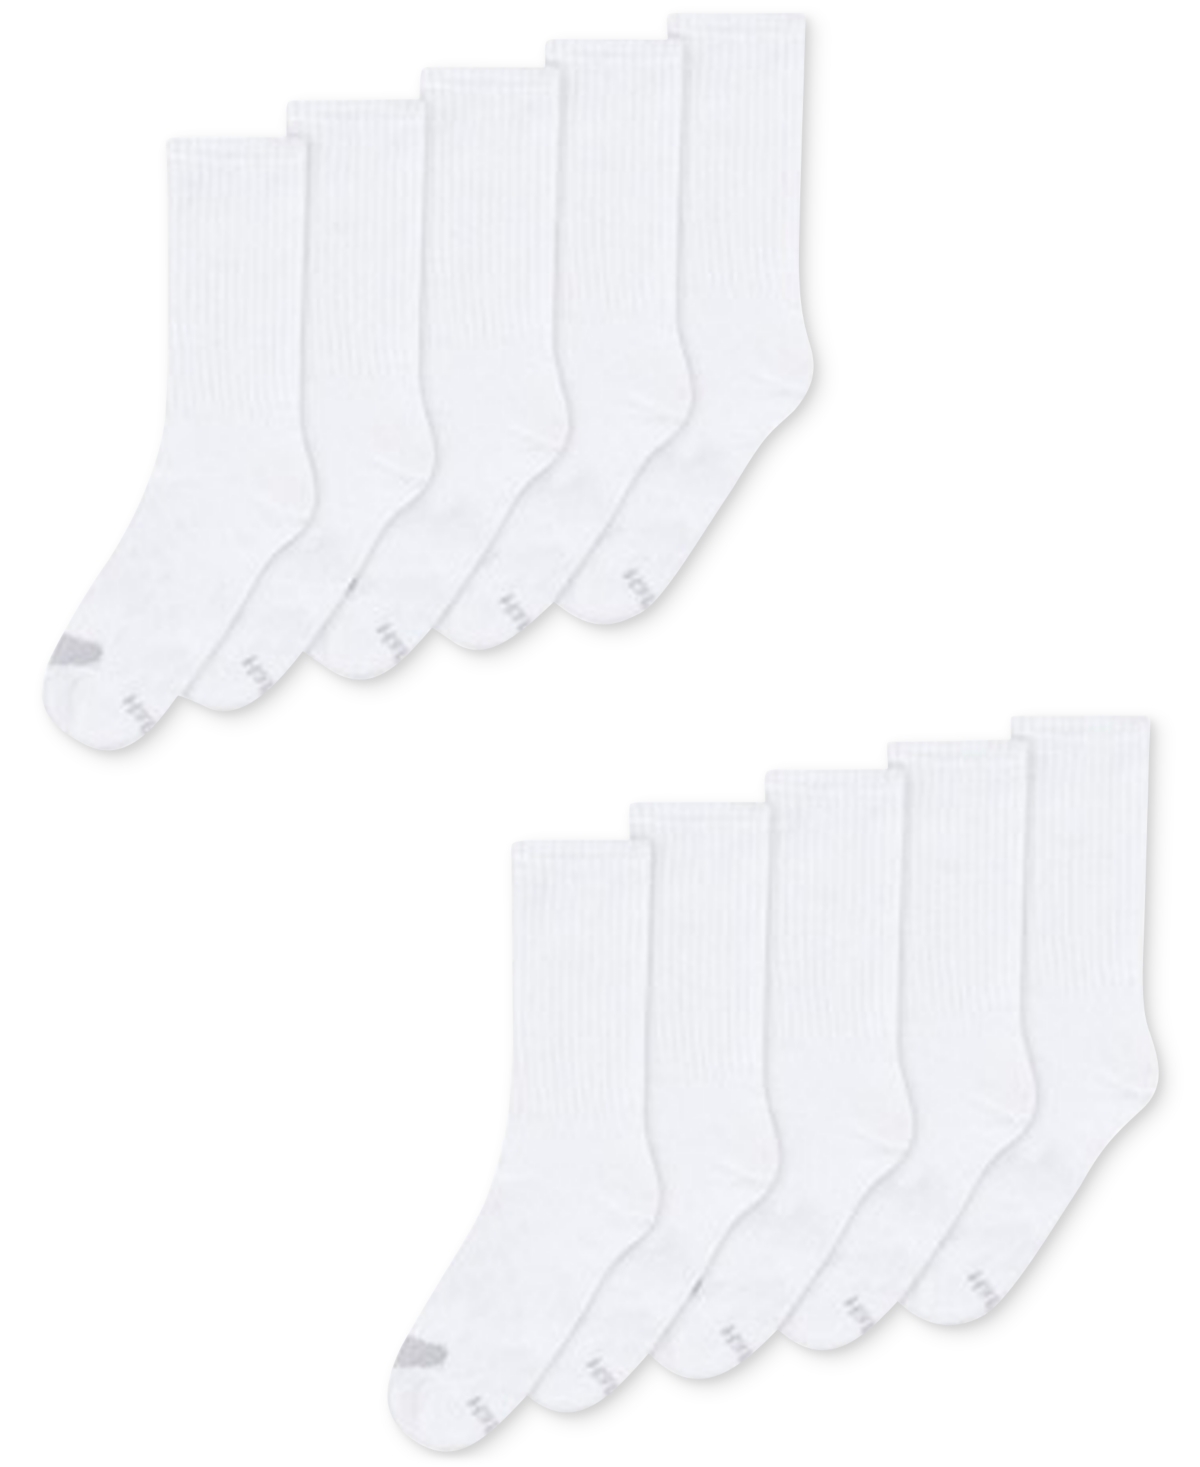 Hanes Women's Platinum 10pk Crew Socks, also available in Extended Sizes